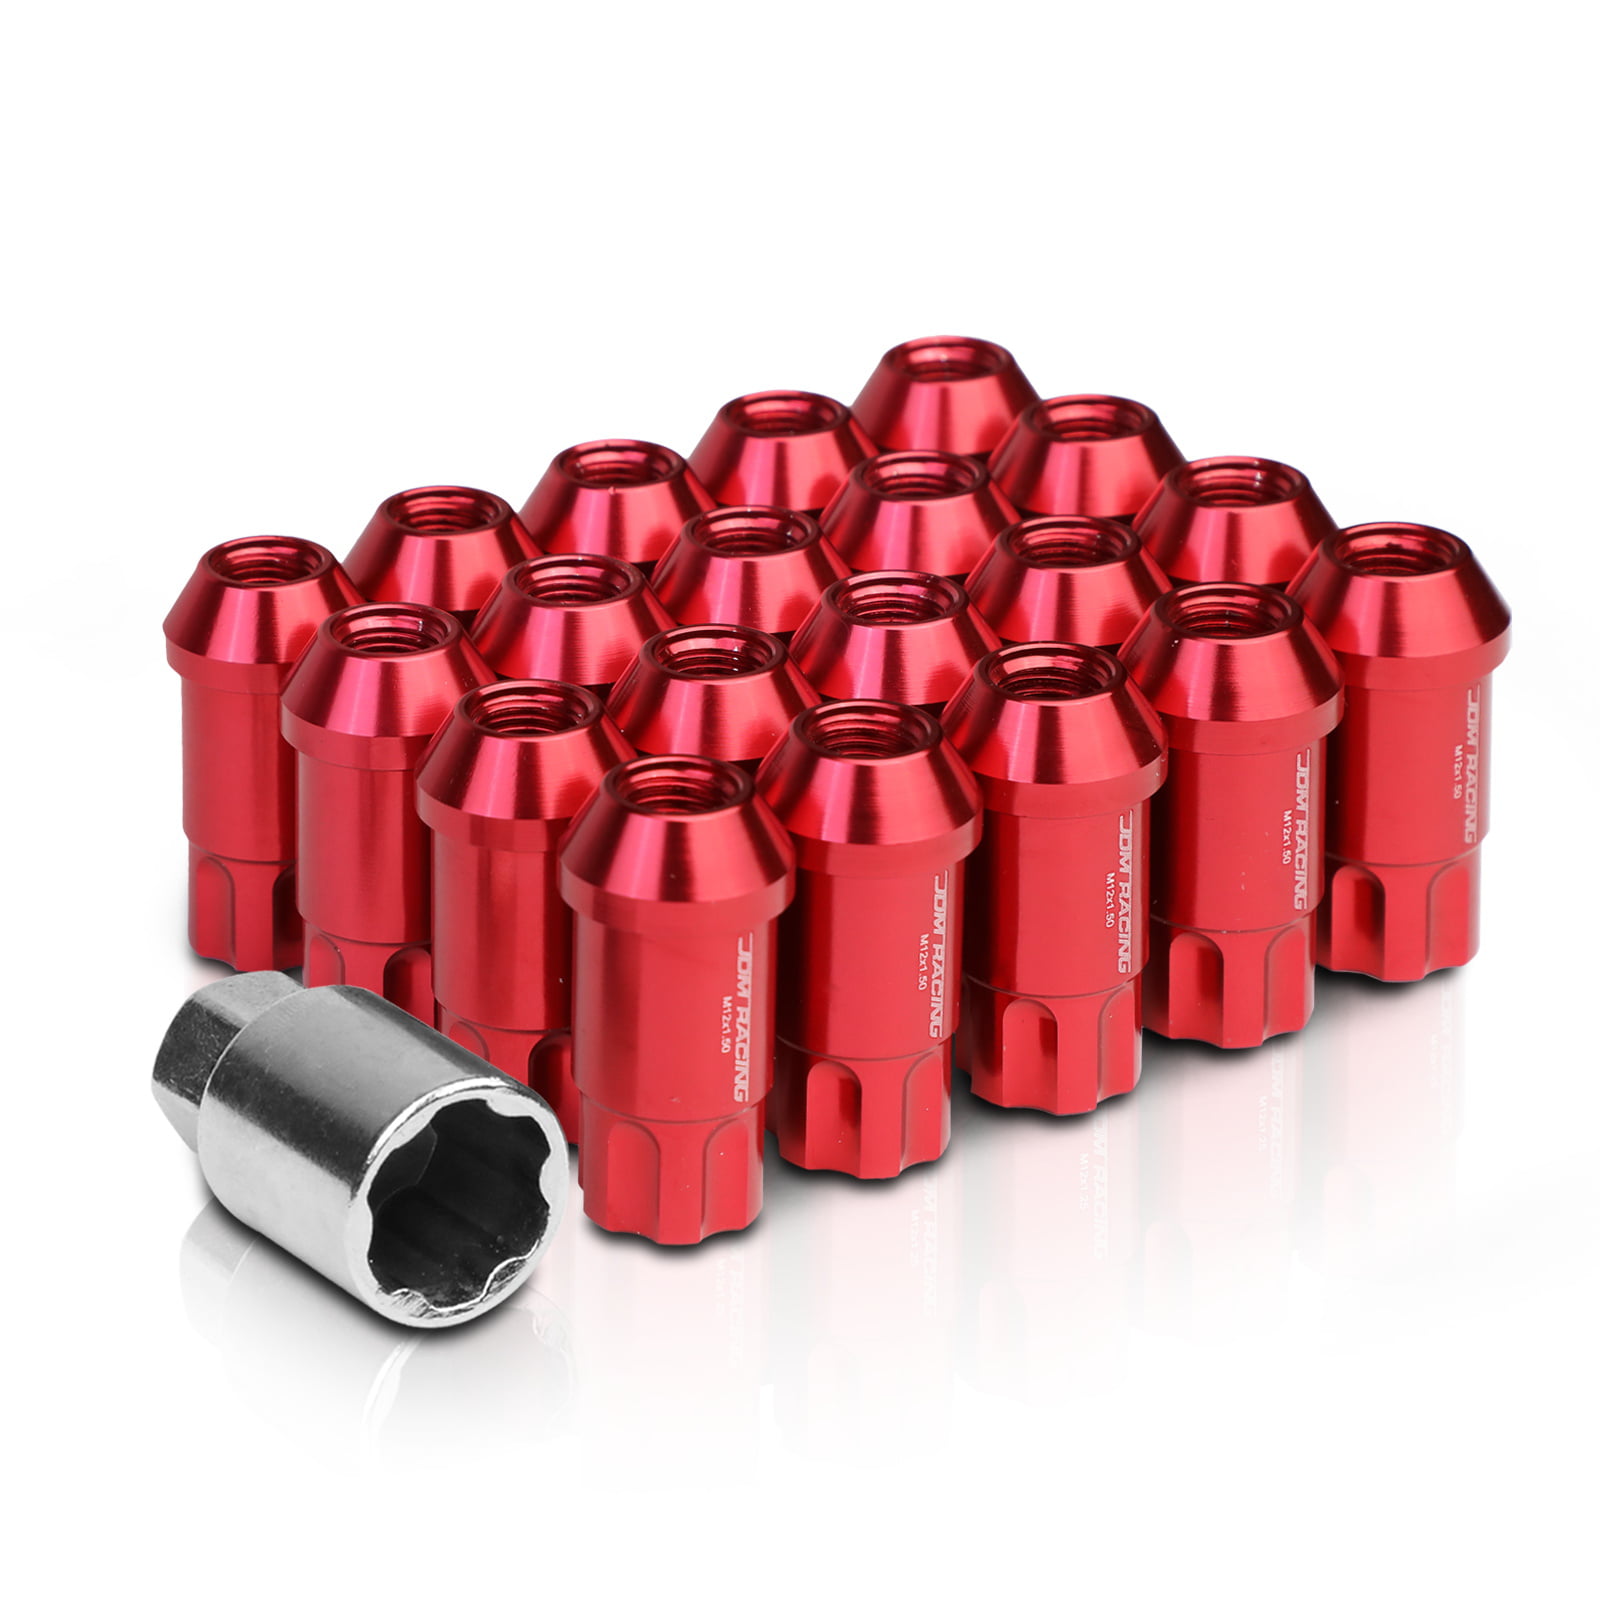 20 PC RED LUG EXTENDED RACING LUG NUTS FOR TIRES/WHEELS/RIMS 50MM 12X1.25 A 